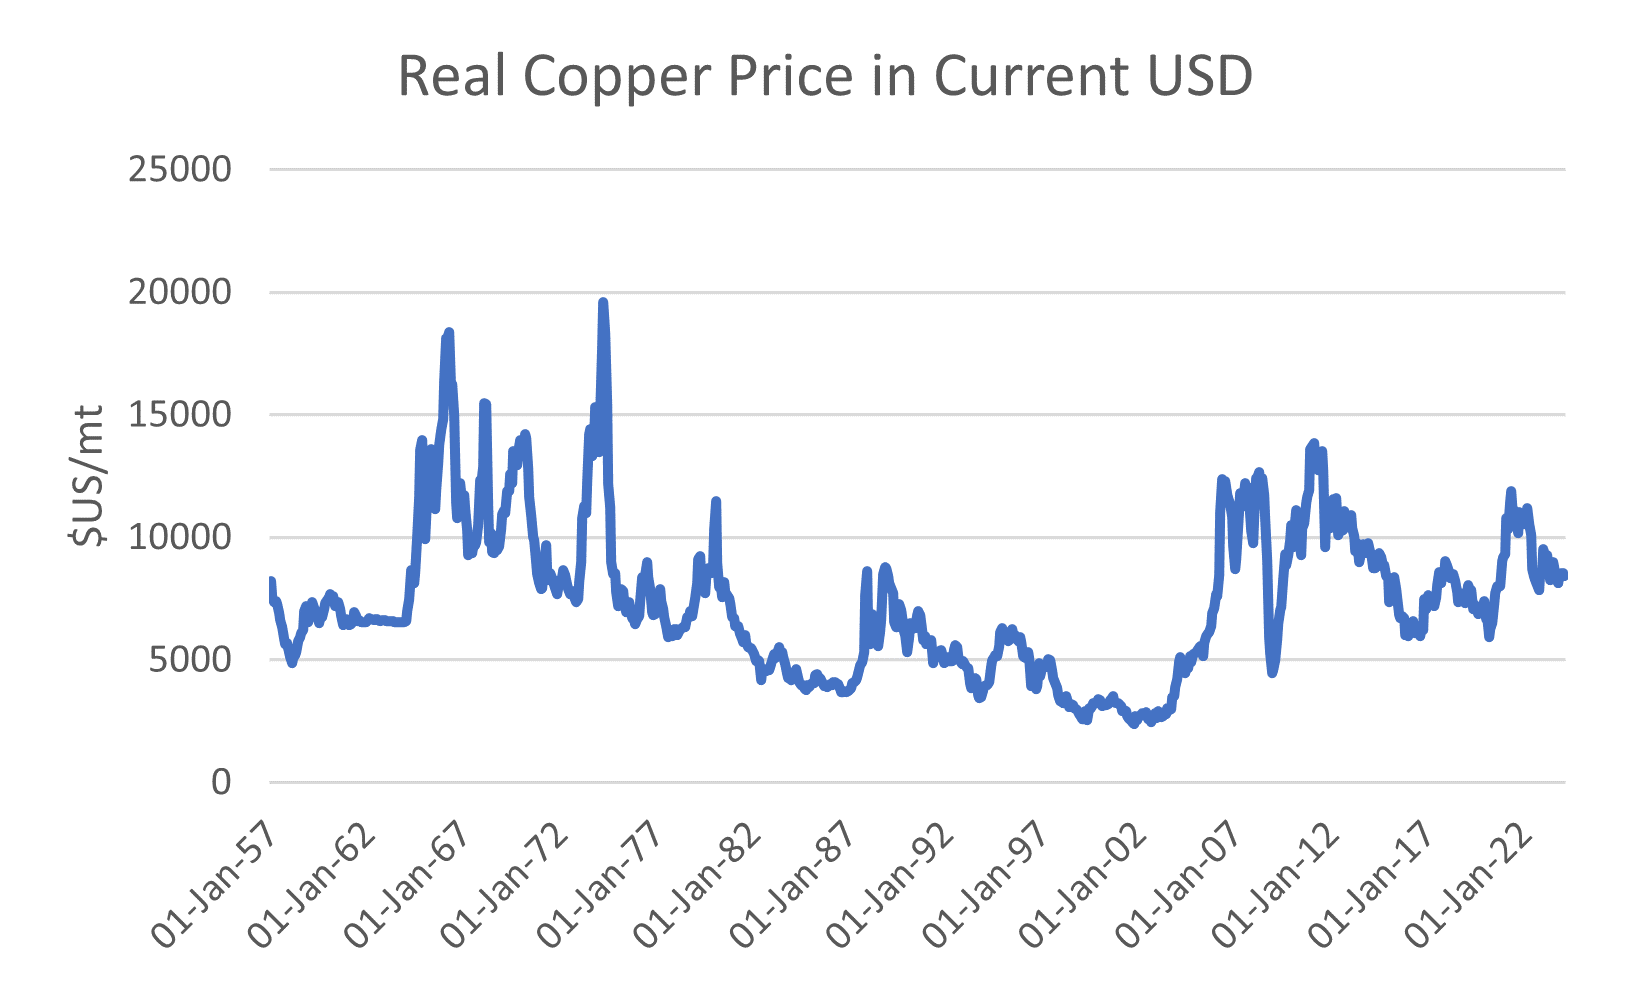 In real terms, copper looks in range and about right but maybe cyclically low. Source: LSEG Datastream.